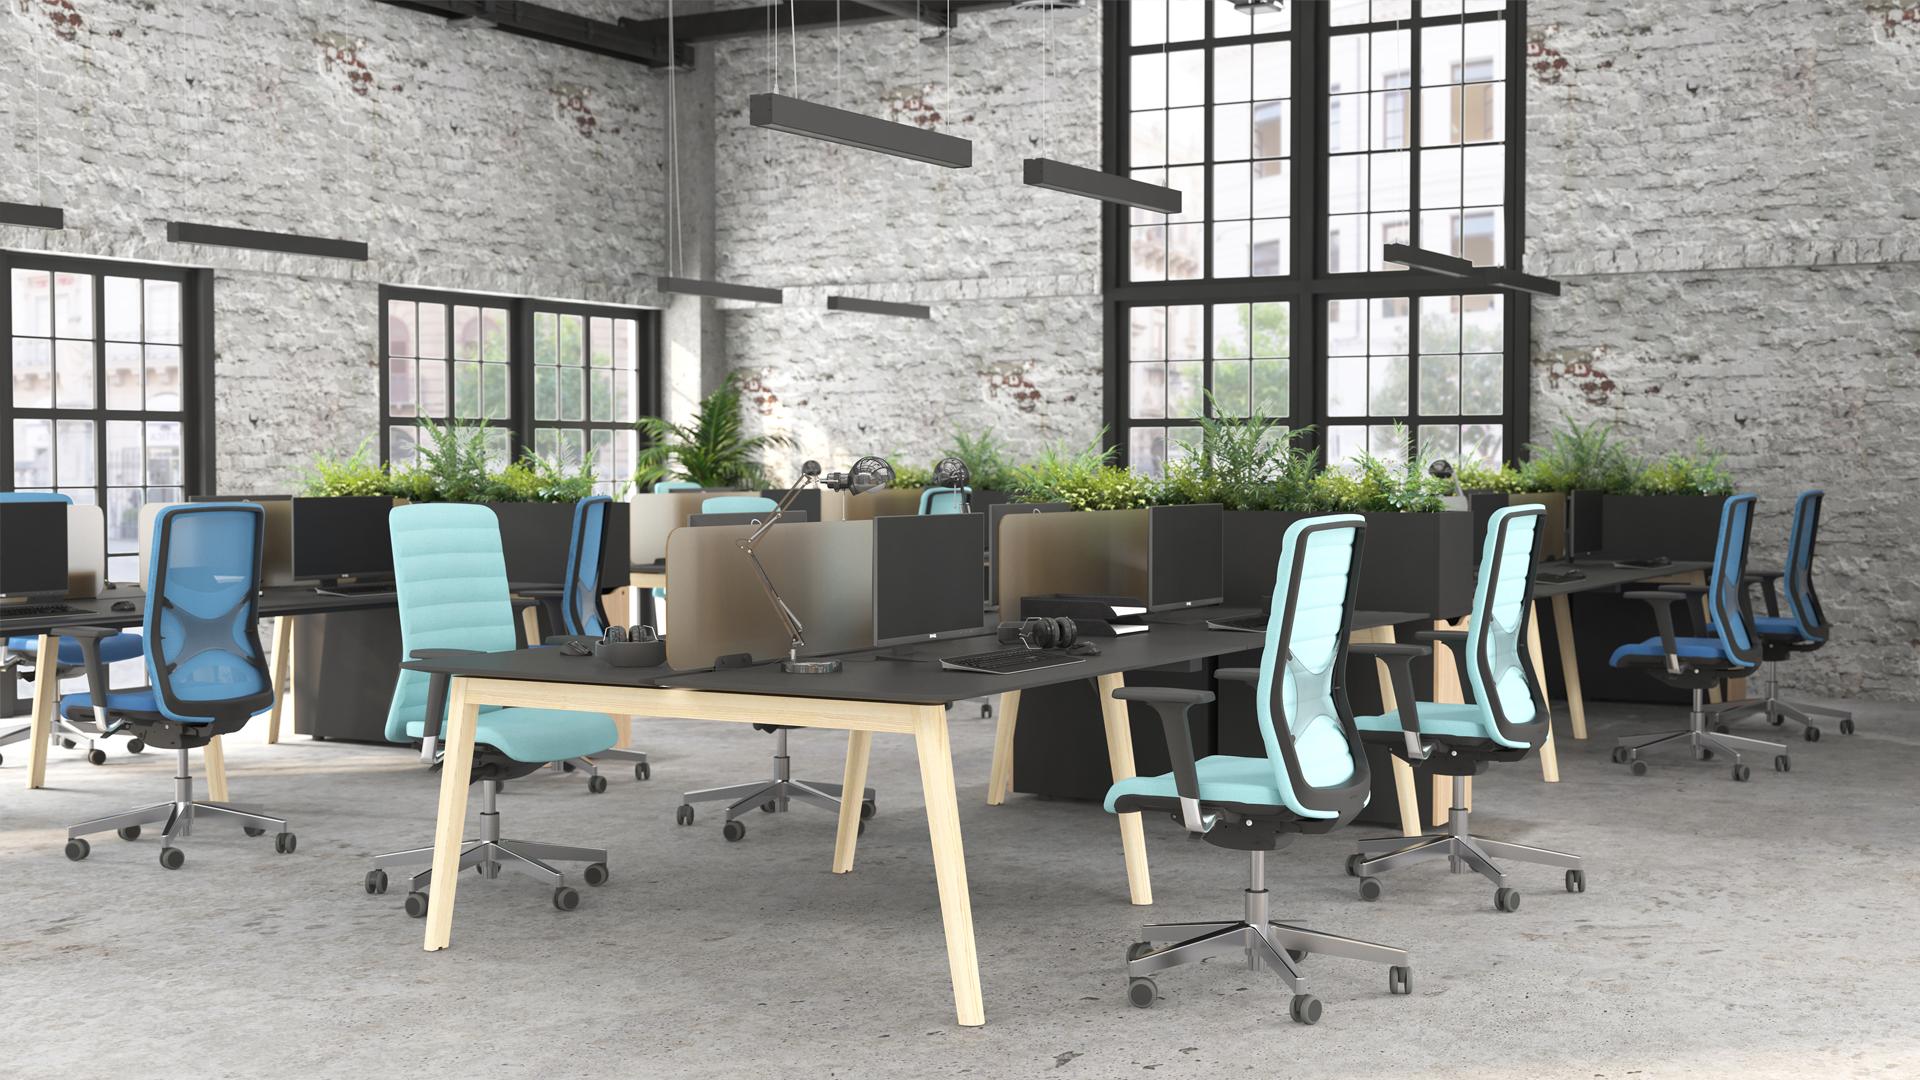 WIND task chair is the best choice for those who spend most of their workday sitting in an office and who value comfort.